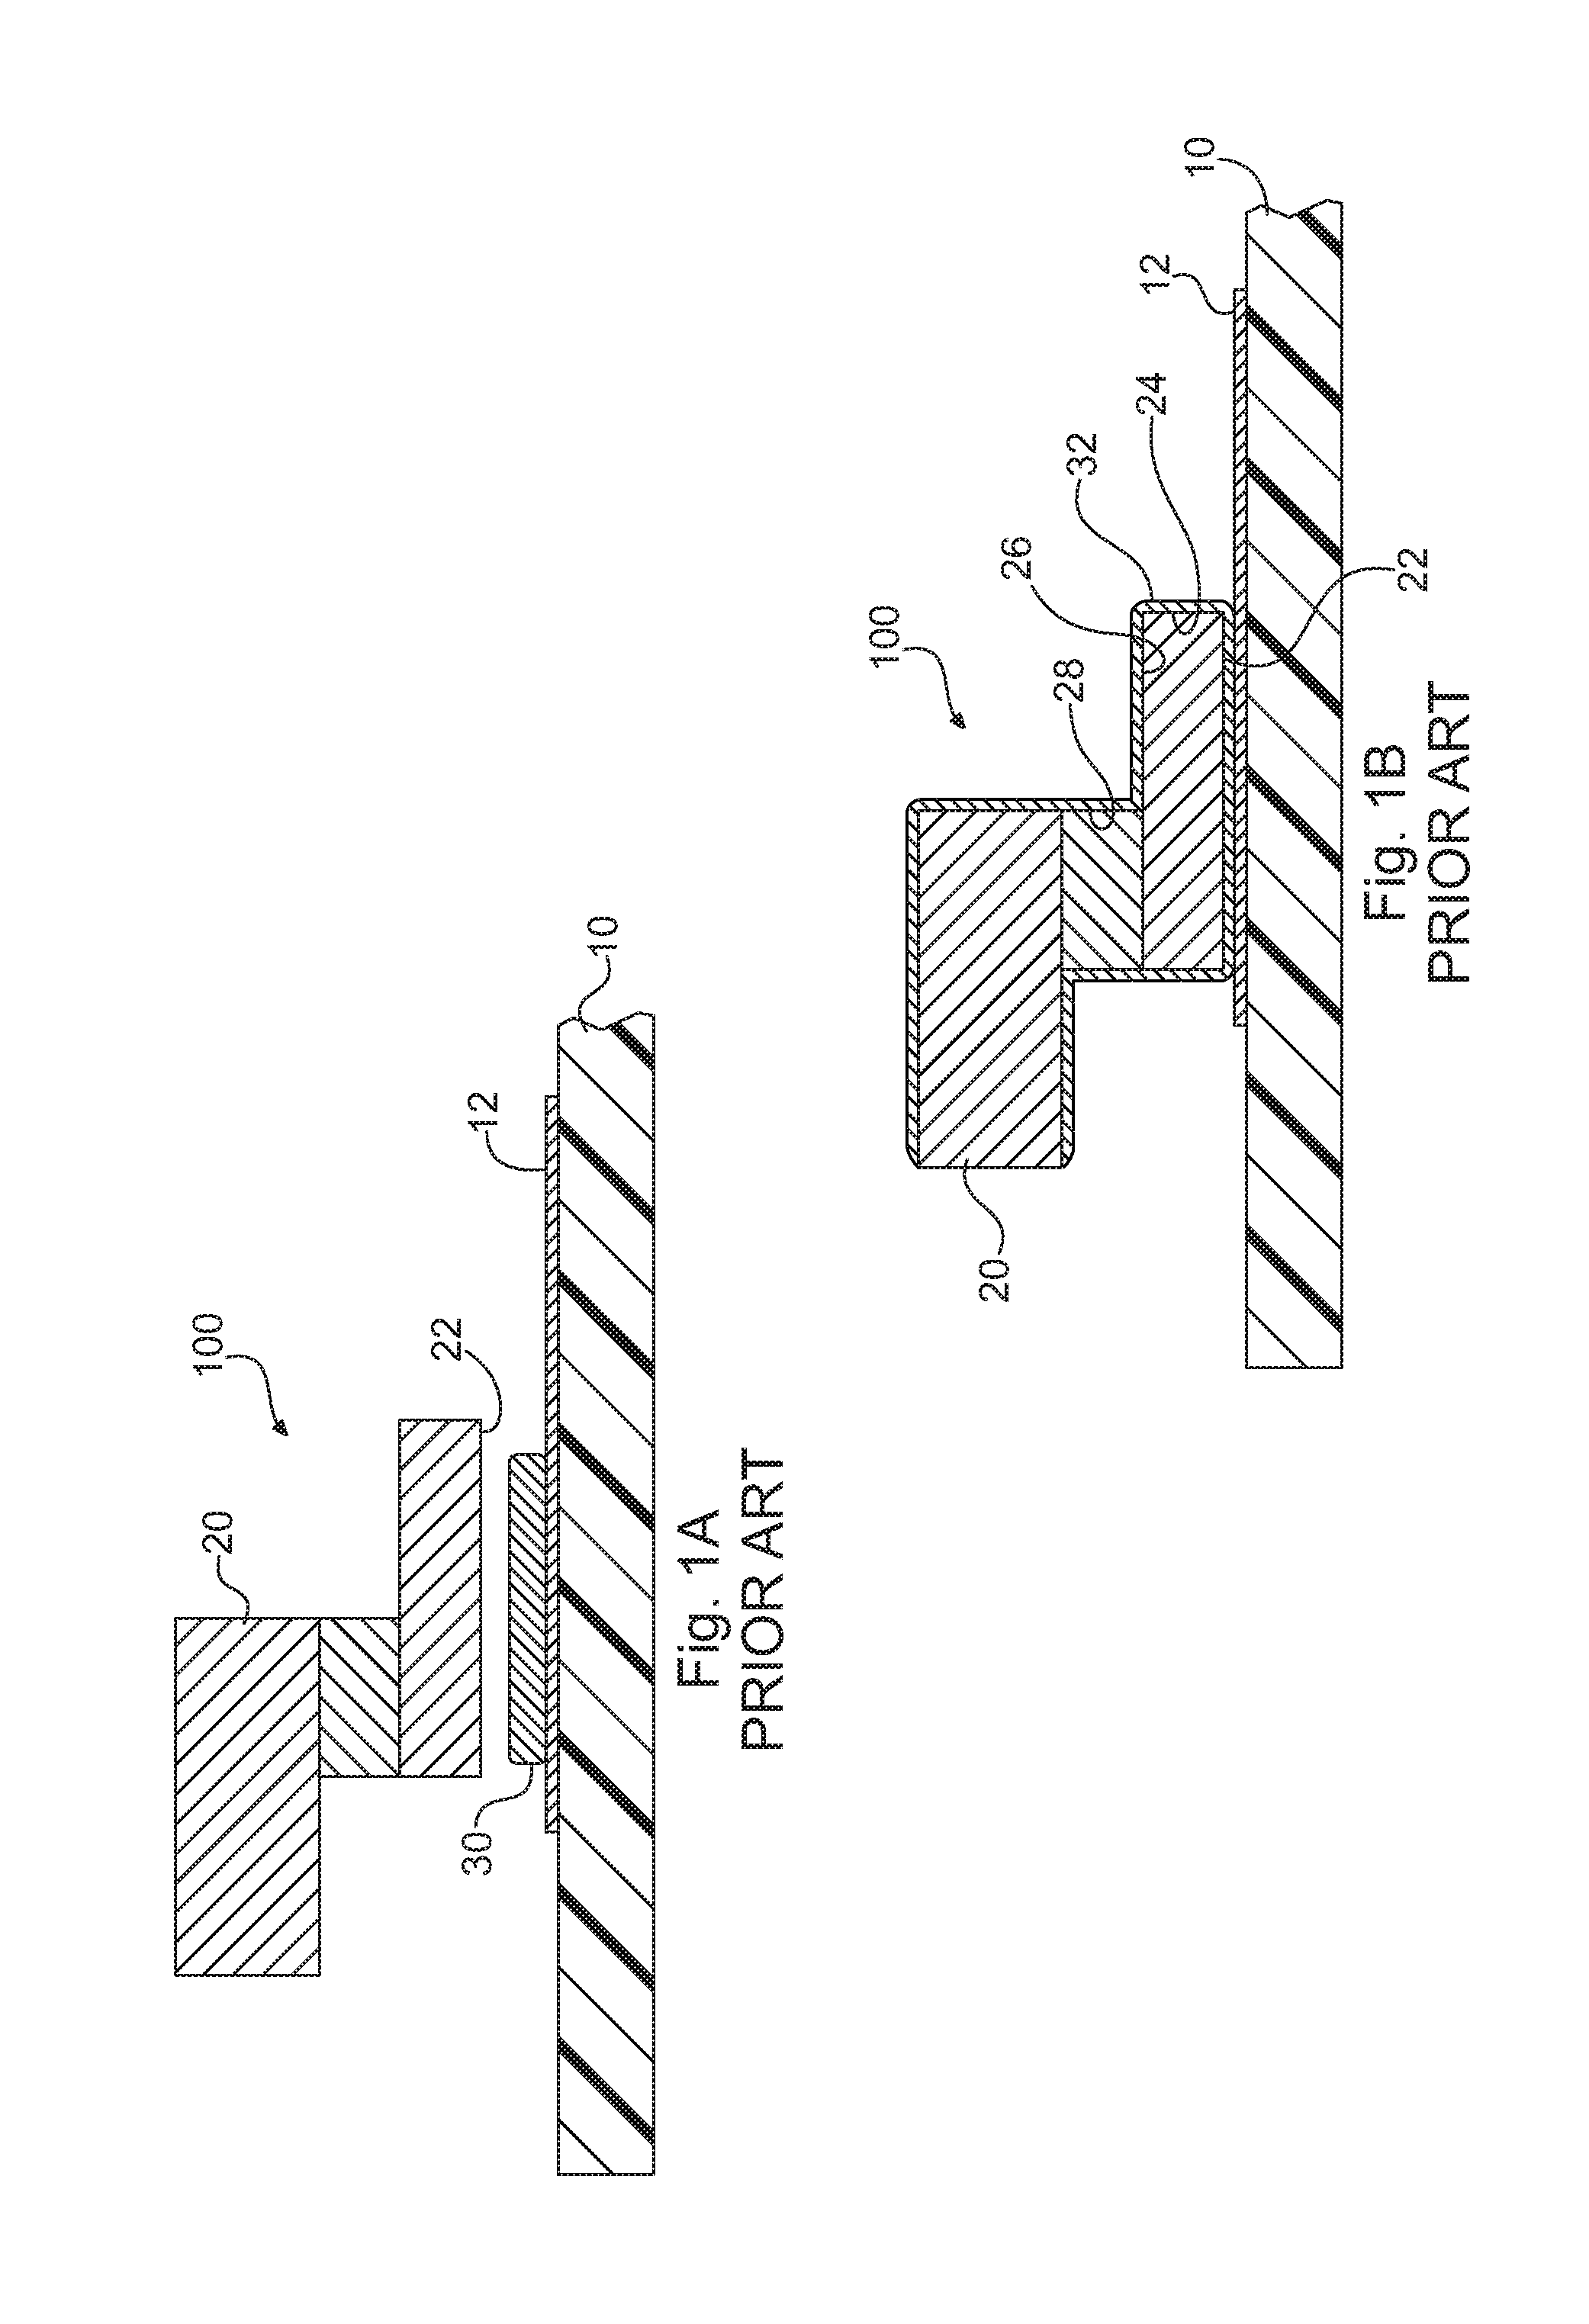 Devices and methods for solder flow control in three-dimensional microstructures